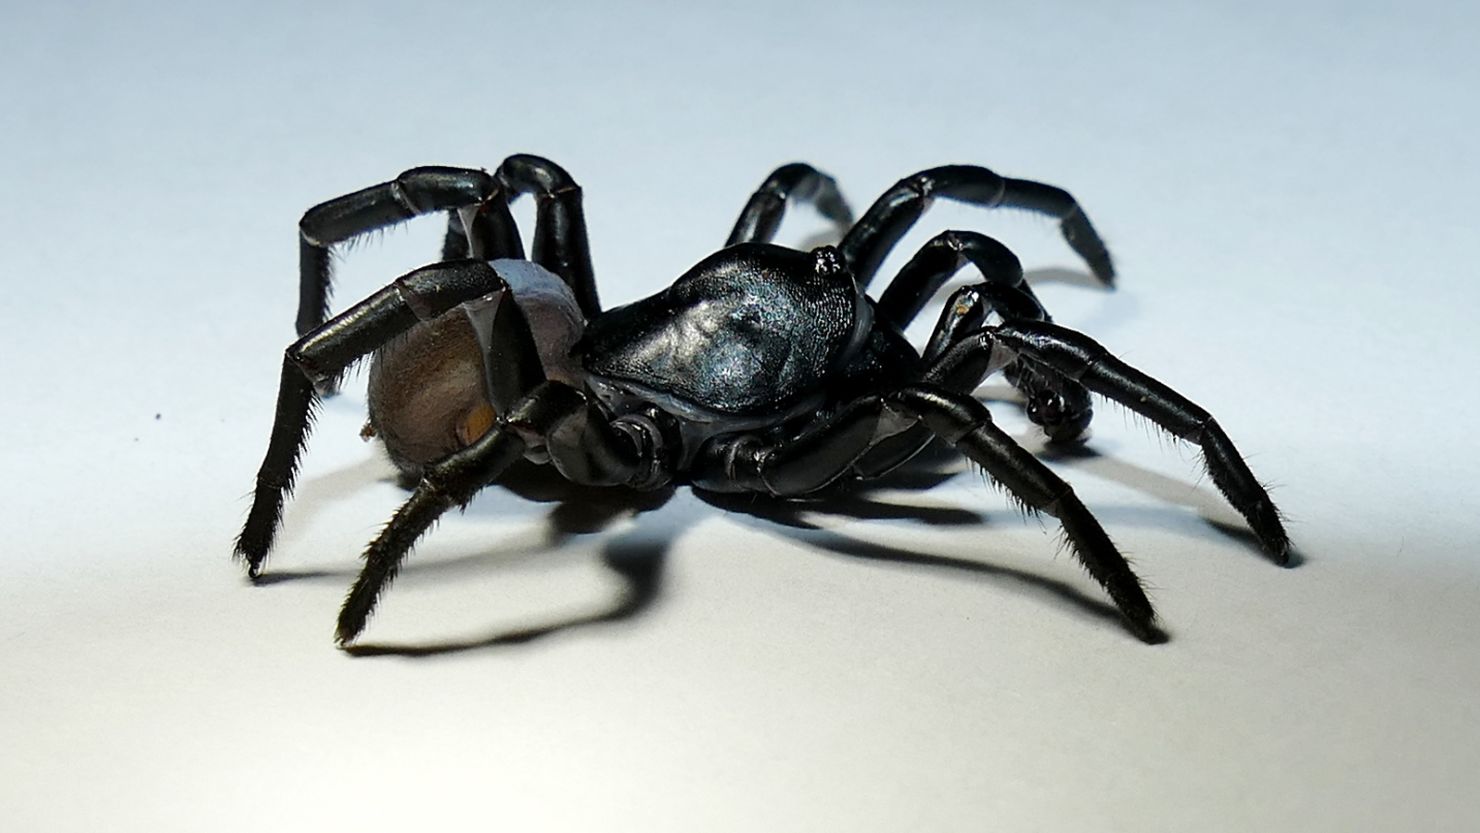 Meet the Pine Rockland Trapdoor Spider, who was recently identified in Florida.